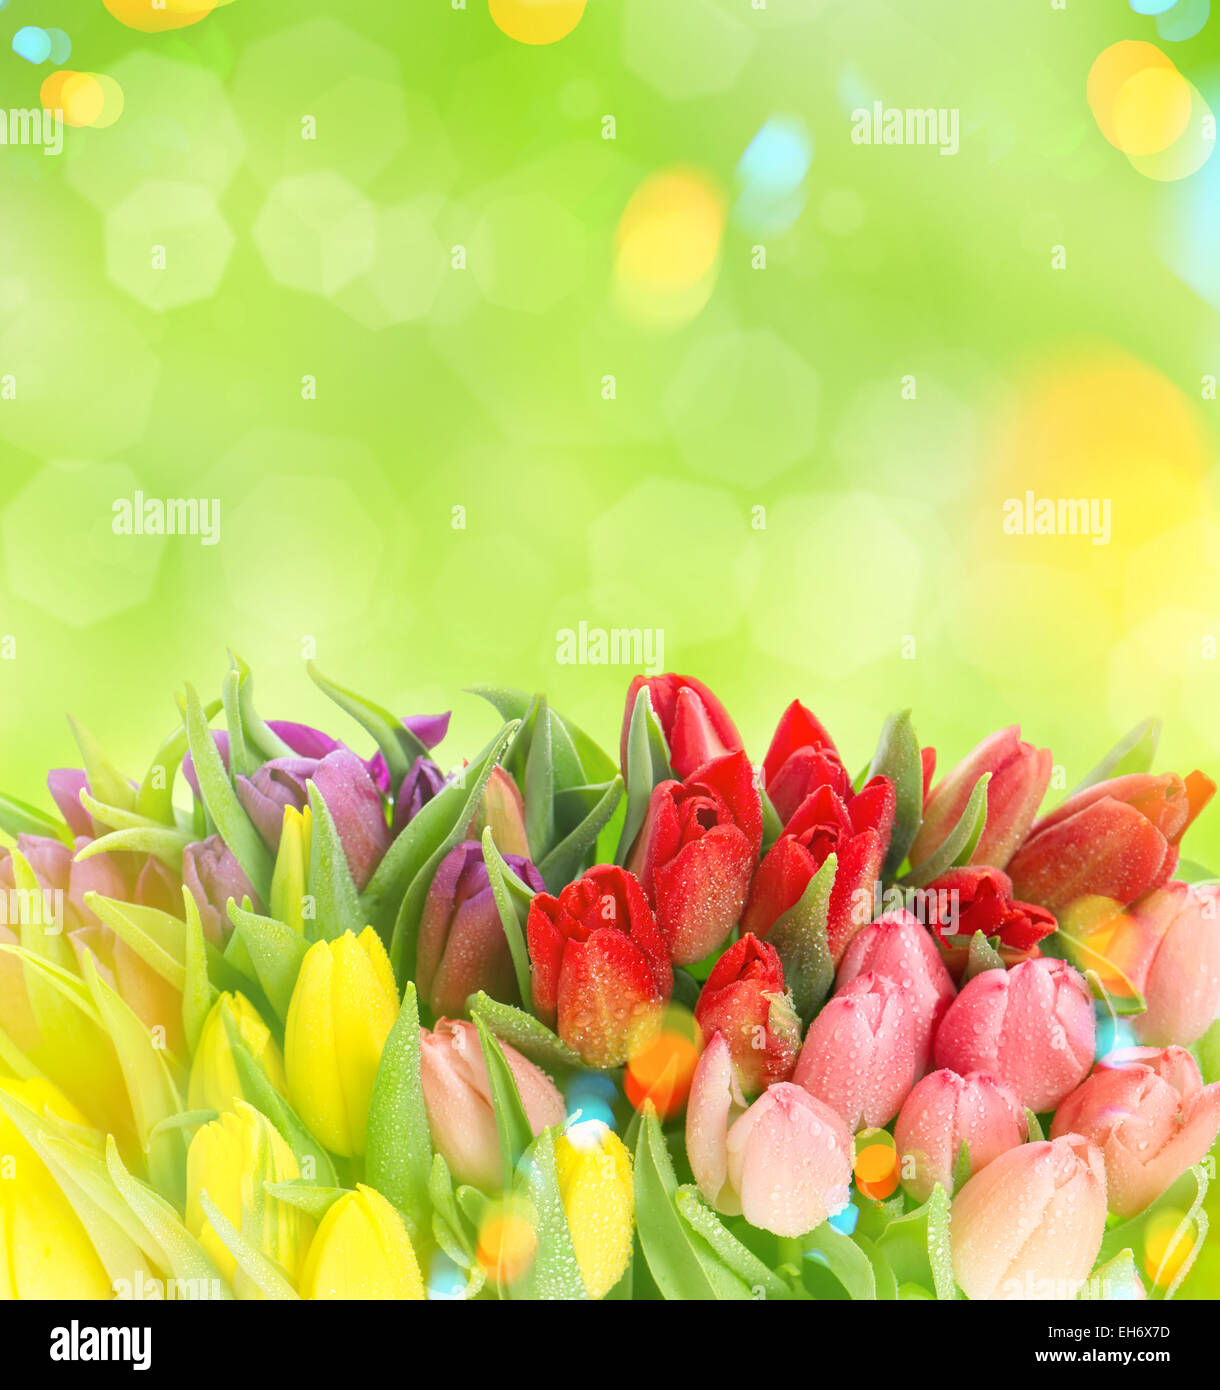 Tulips over blurred green background. Fresh spring flowers with water drops. Retro style toned picture with light leaks Stock Photo